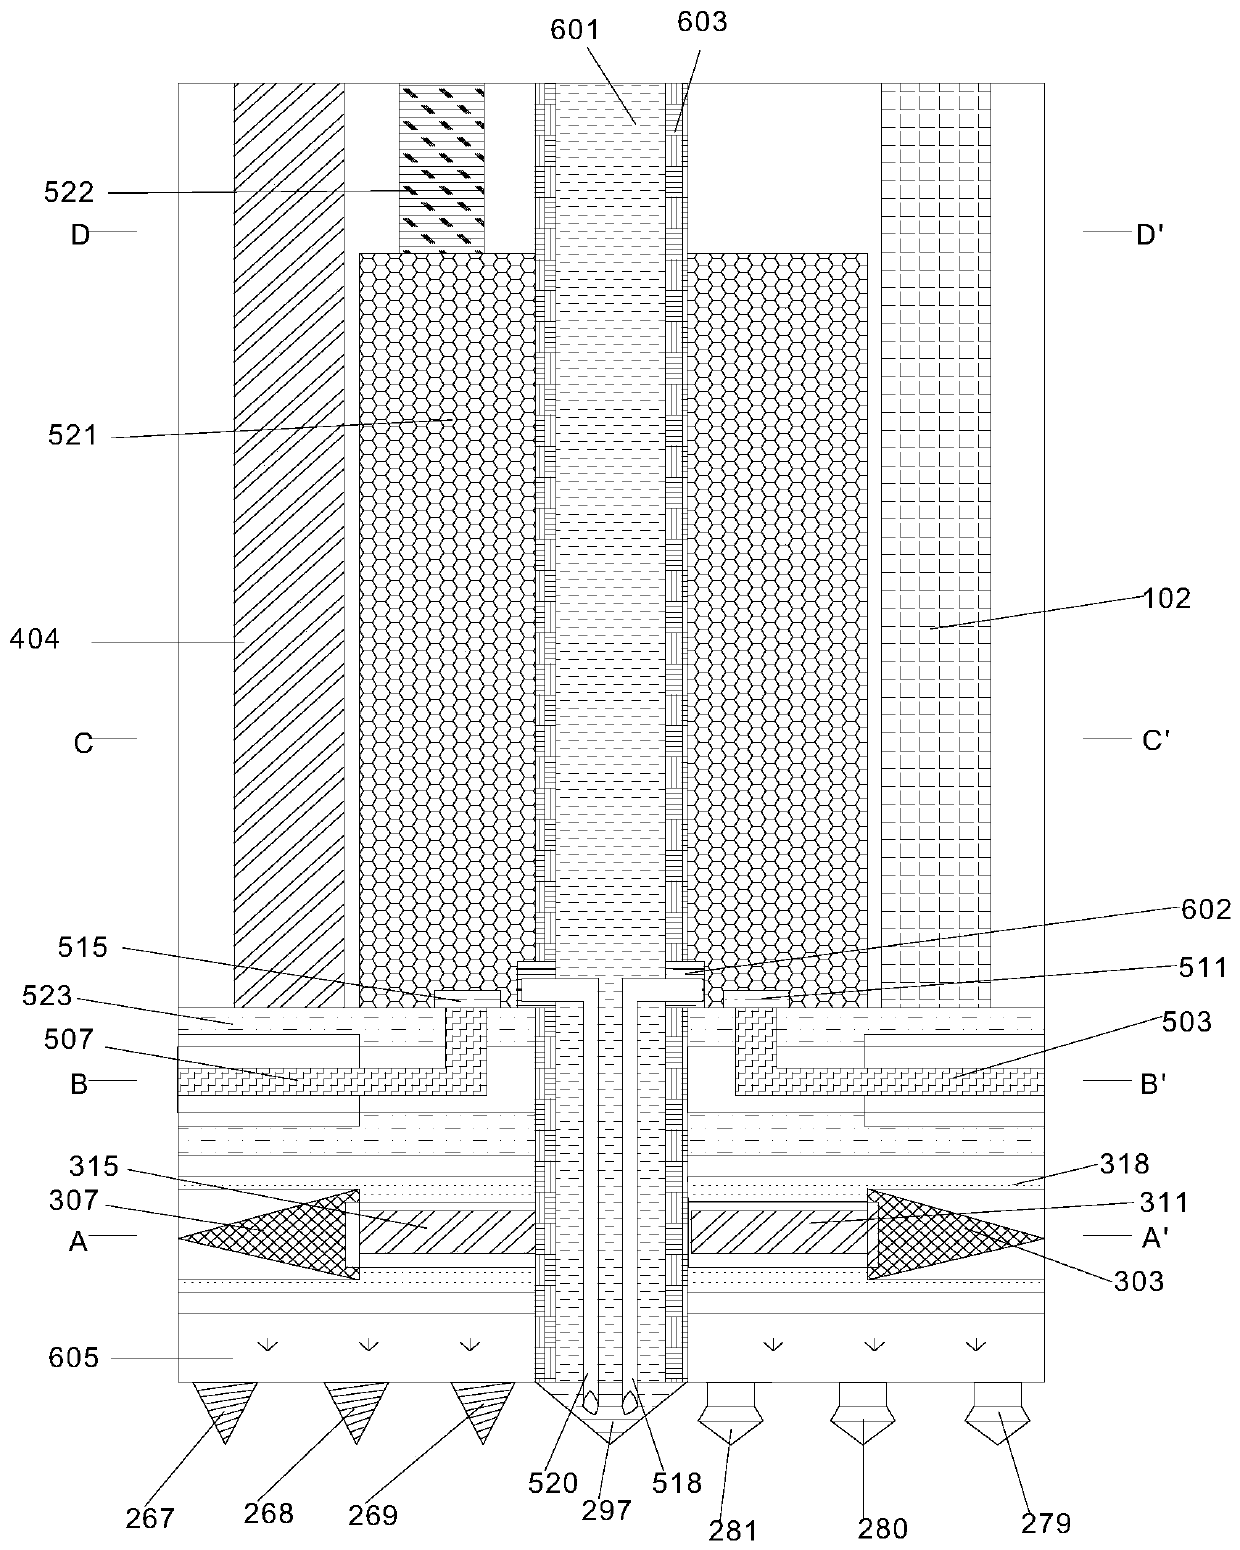 Flank-Vertical Combined Multidimensional Freeze Drilling and Cutting Method for Soft and Hard Formation